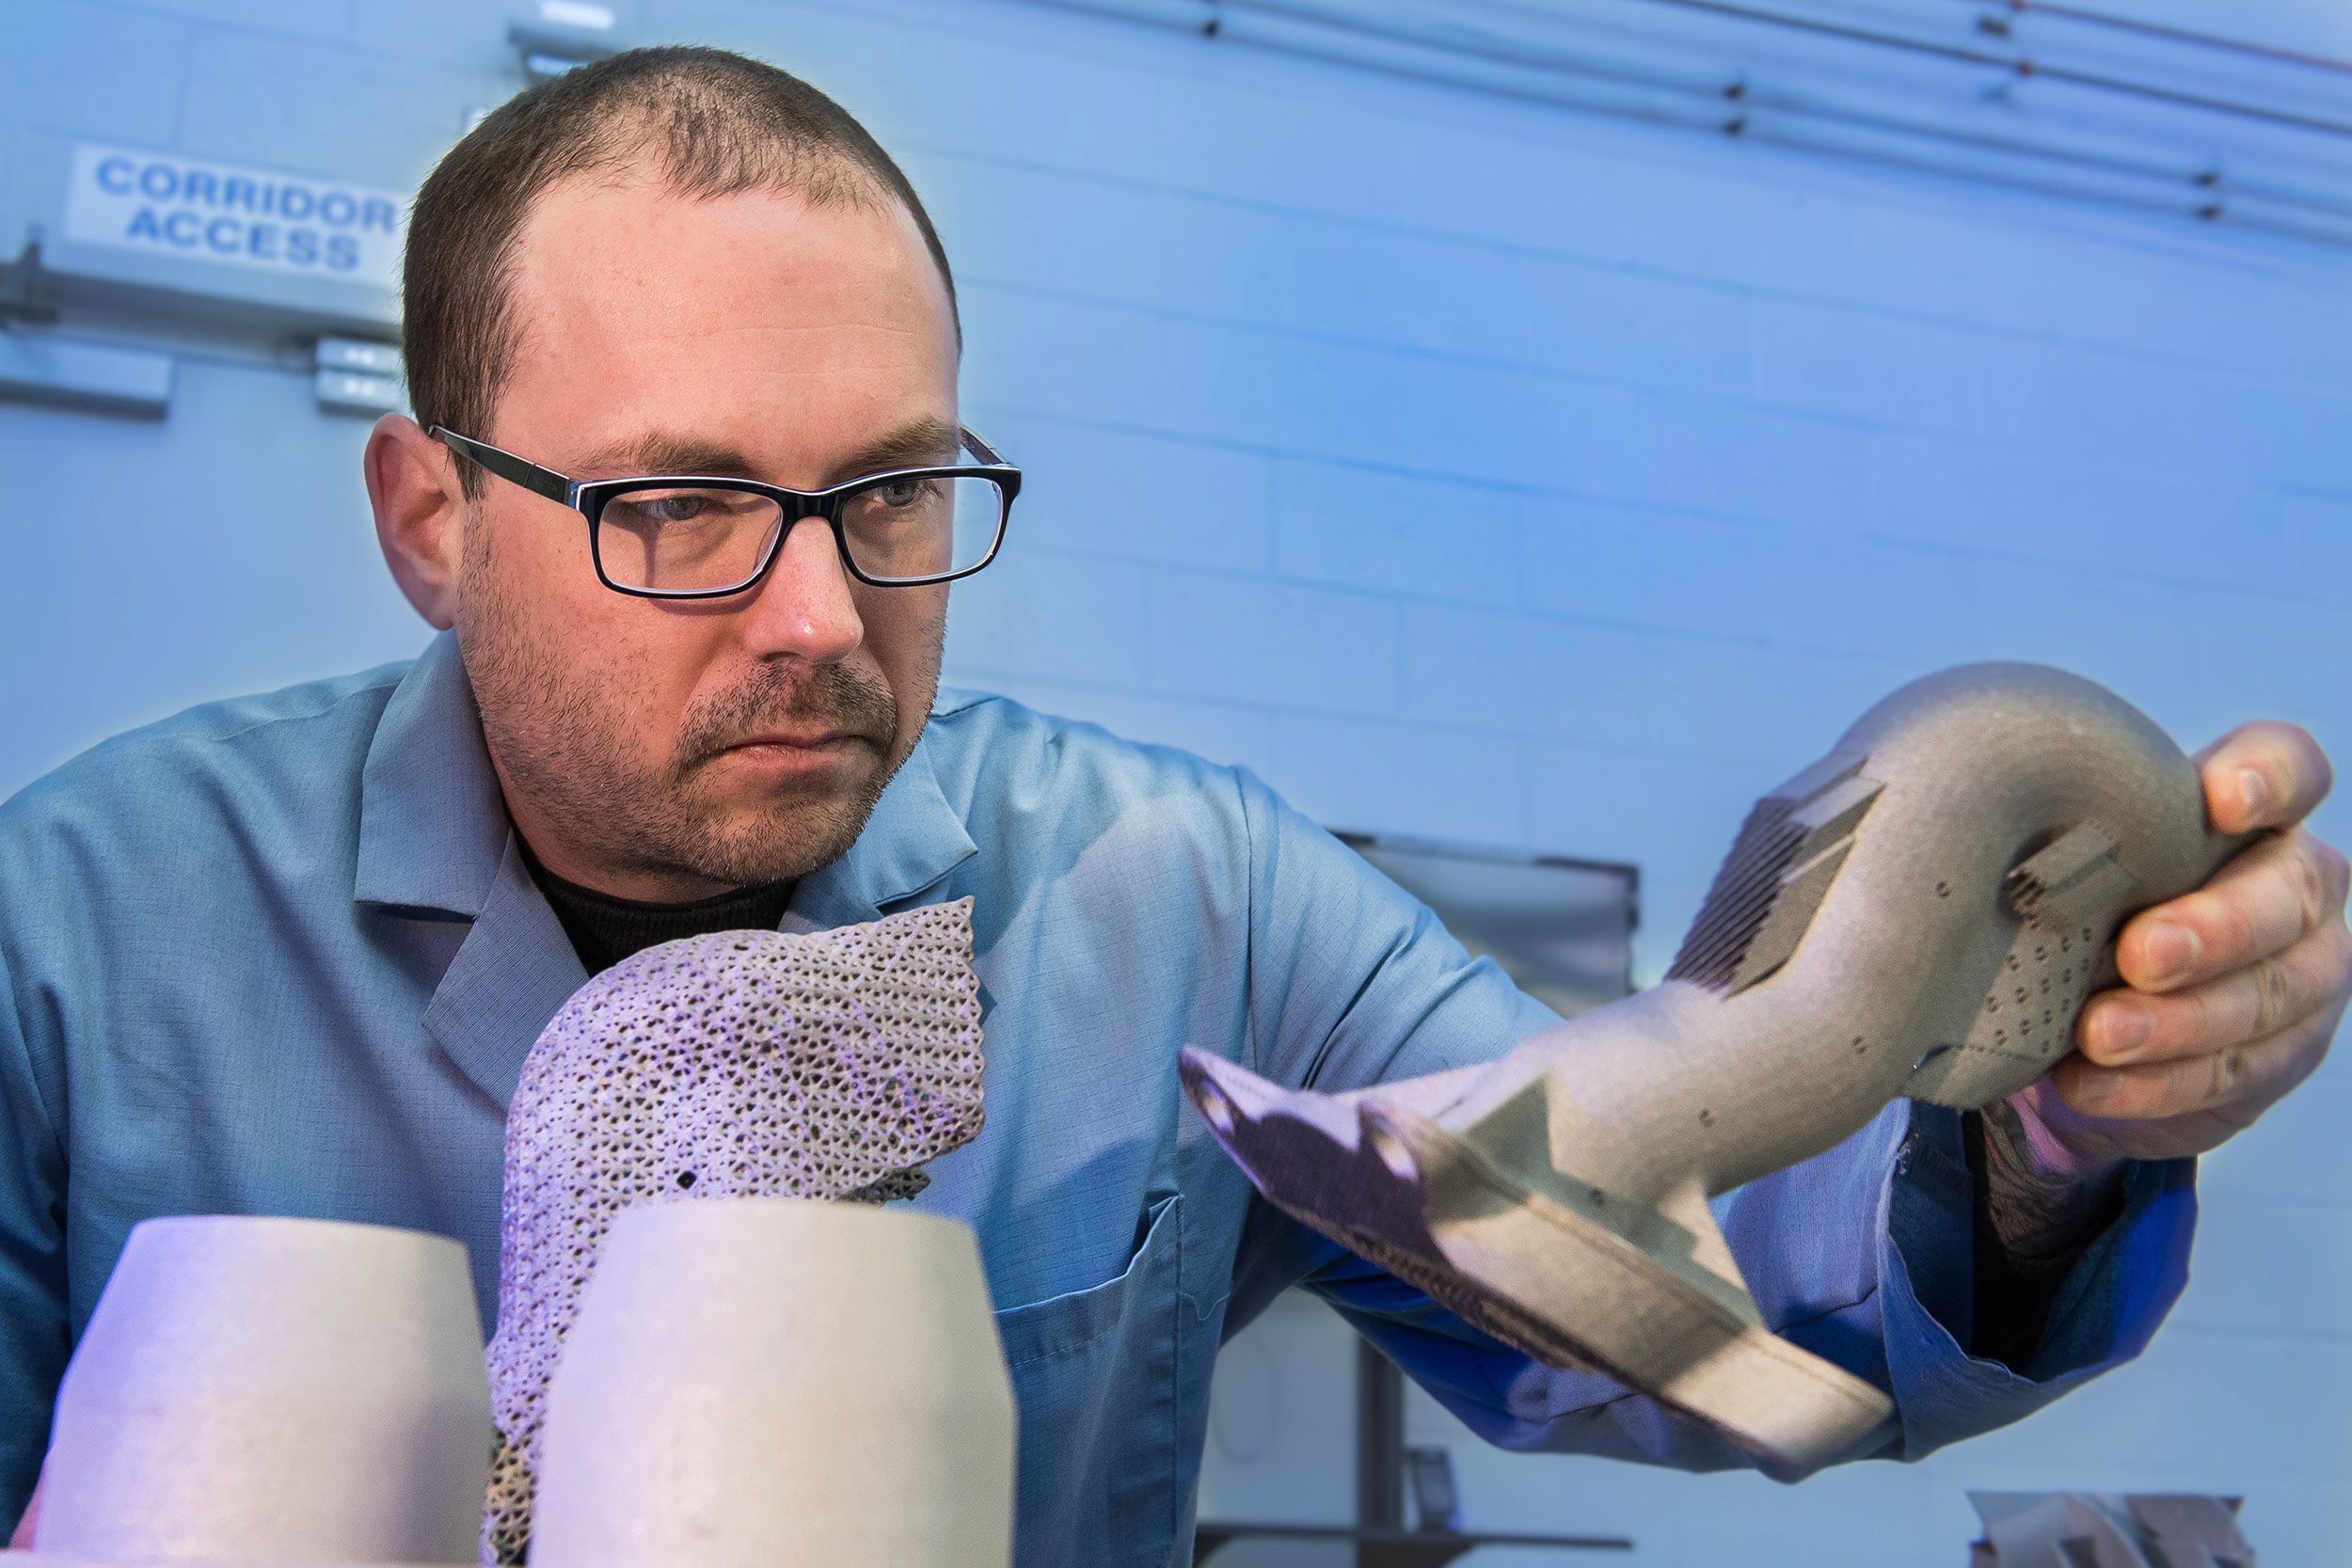 Army researcher Dr. Brandon McWilliams, holds a sample 3D metal printed part. Photo via the U.S. Army/ David McNally.